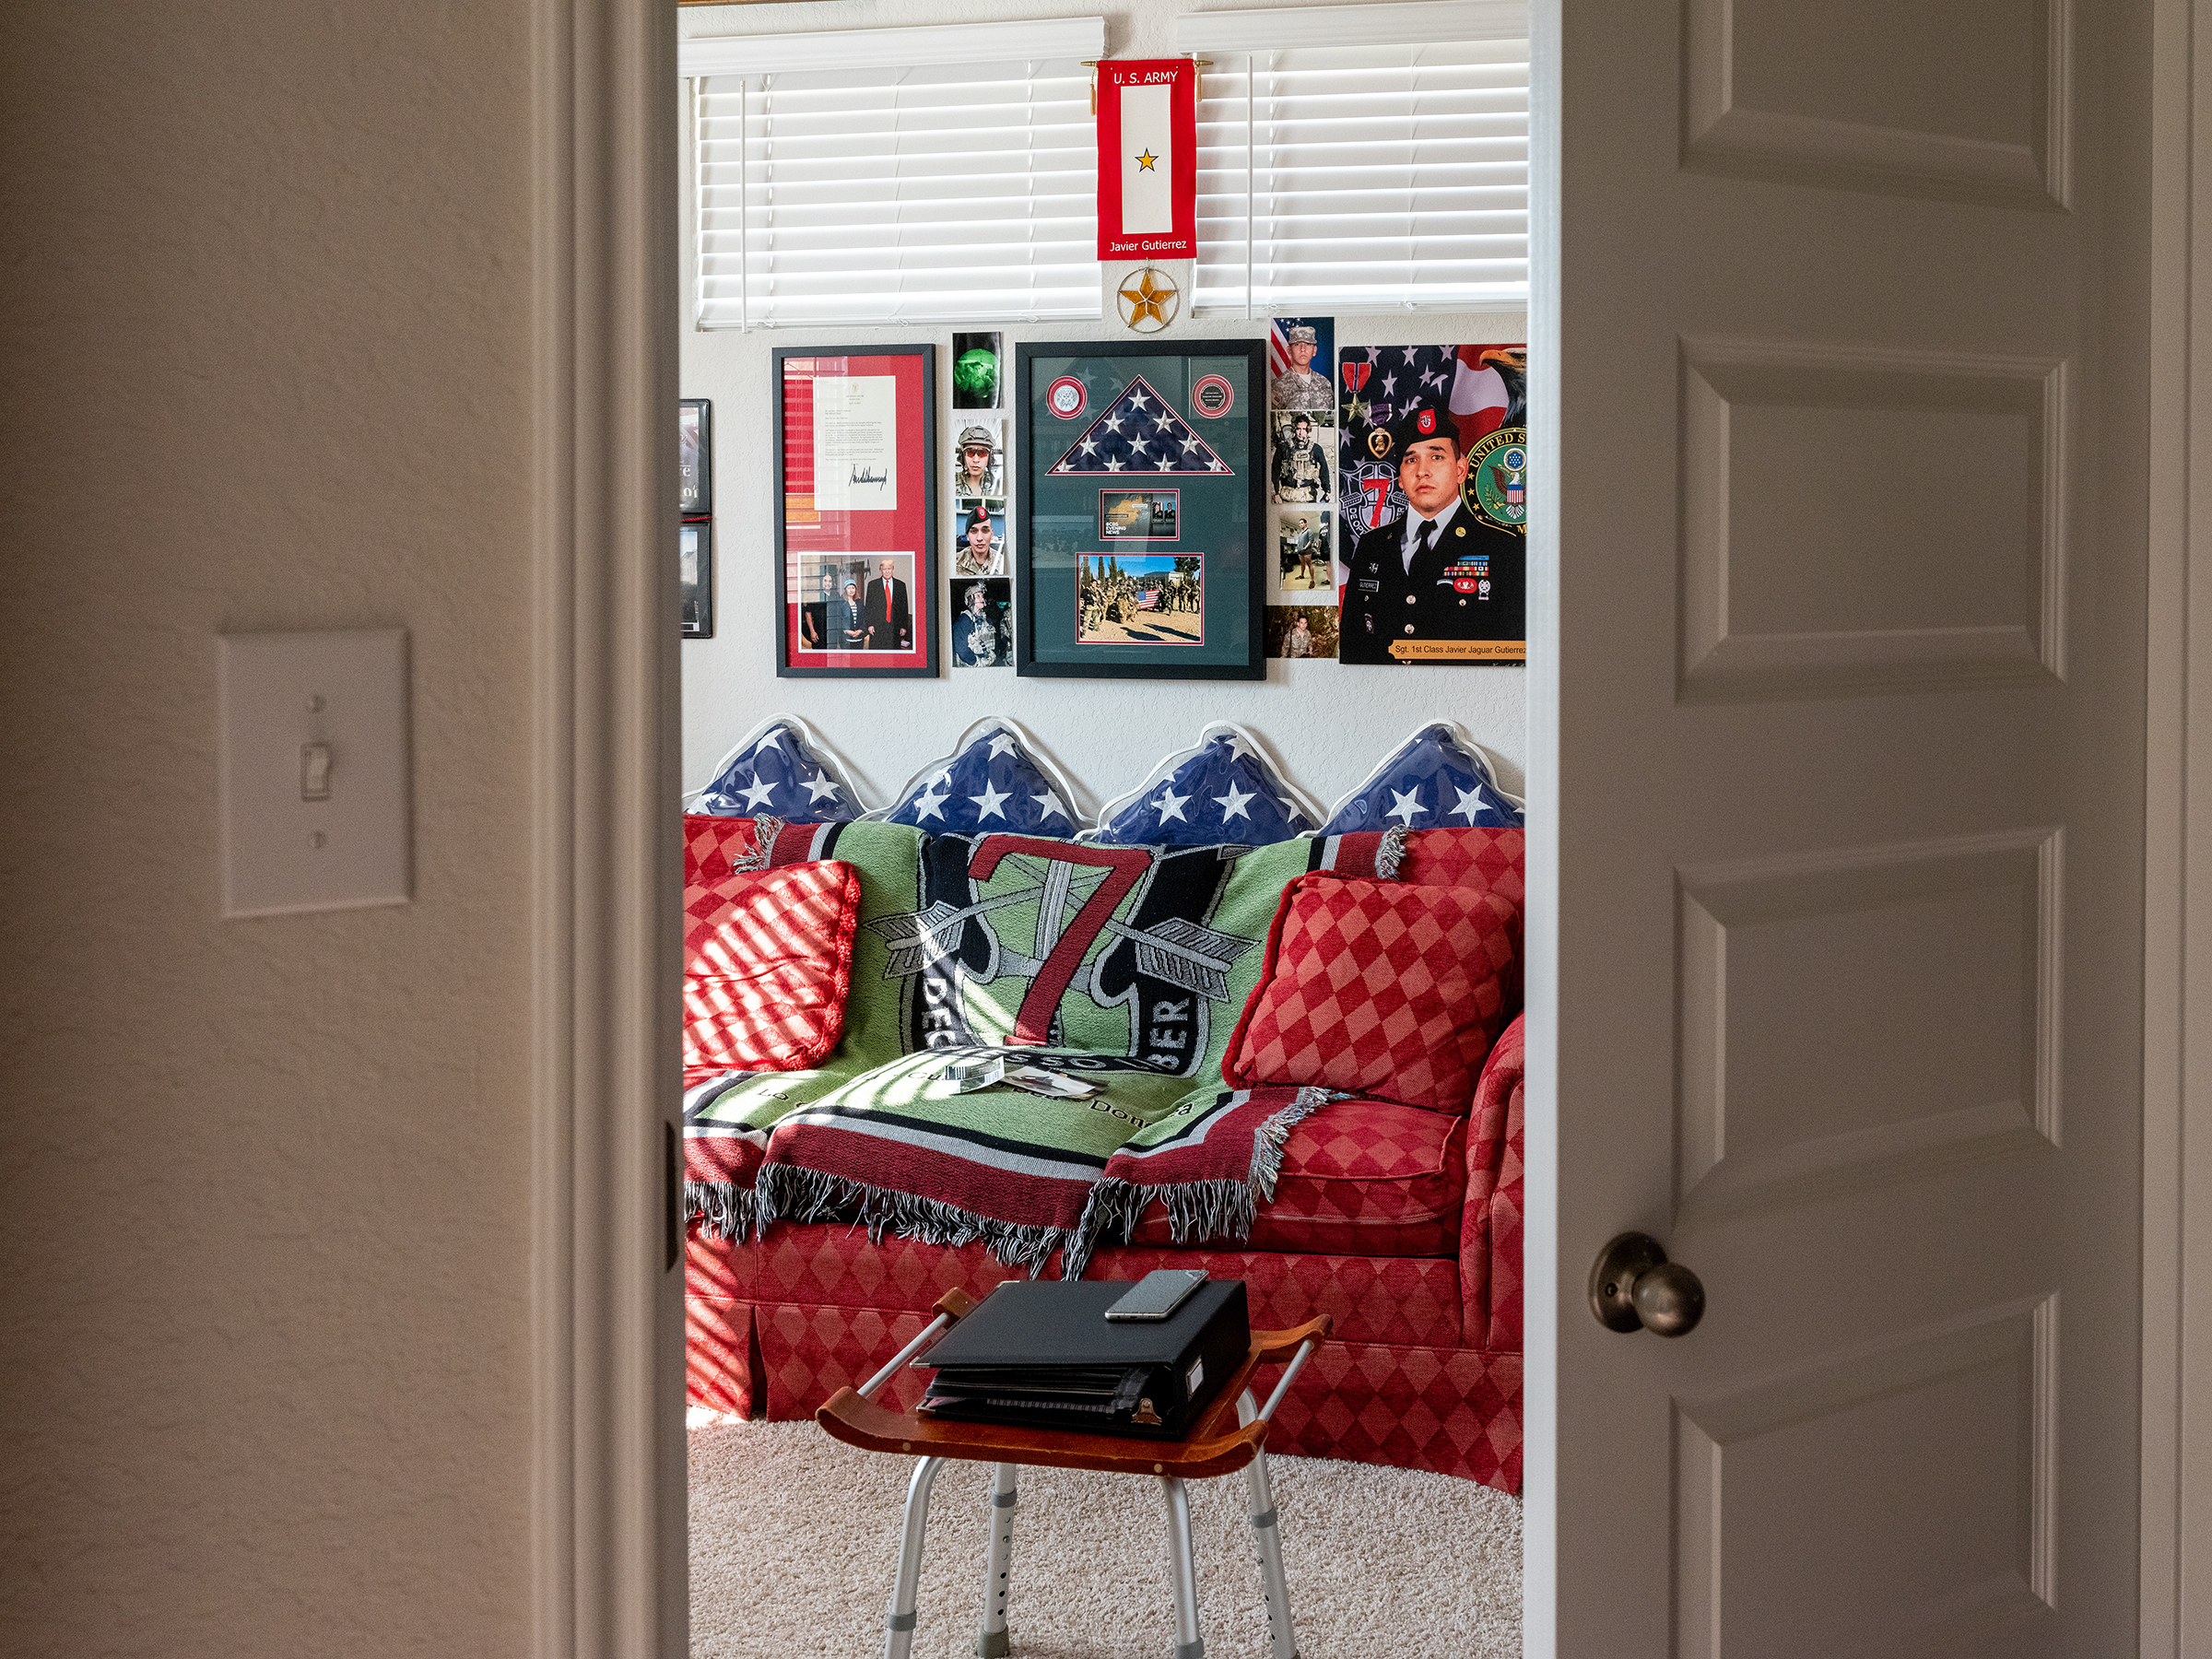 In San Antonio, Texas, on Aug. 26, the sunroom in the two-story brick home of Javier "Jaguar" Gutierrez's parents is decorated with remembrances of their fallen son, an American service member who was killed in February 2020 by an Afghan soldier just weeks before a peace deal was signed between the U.S. and the Taliban.